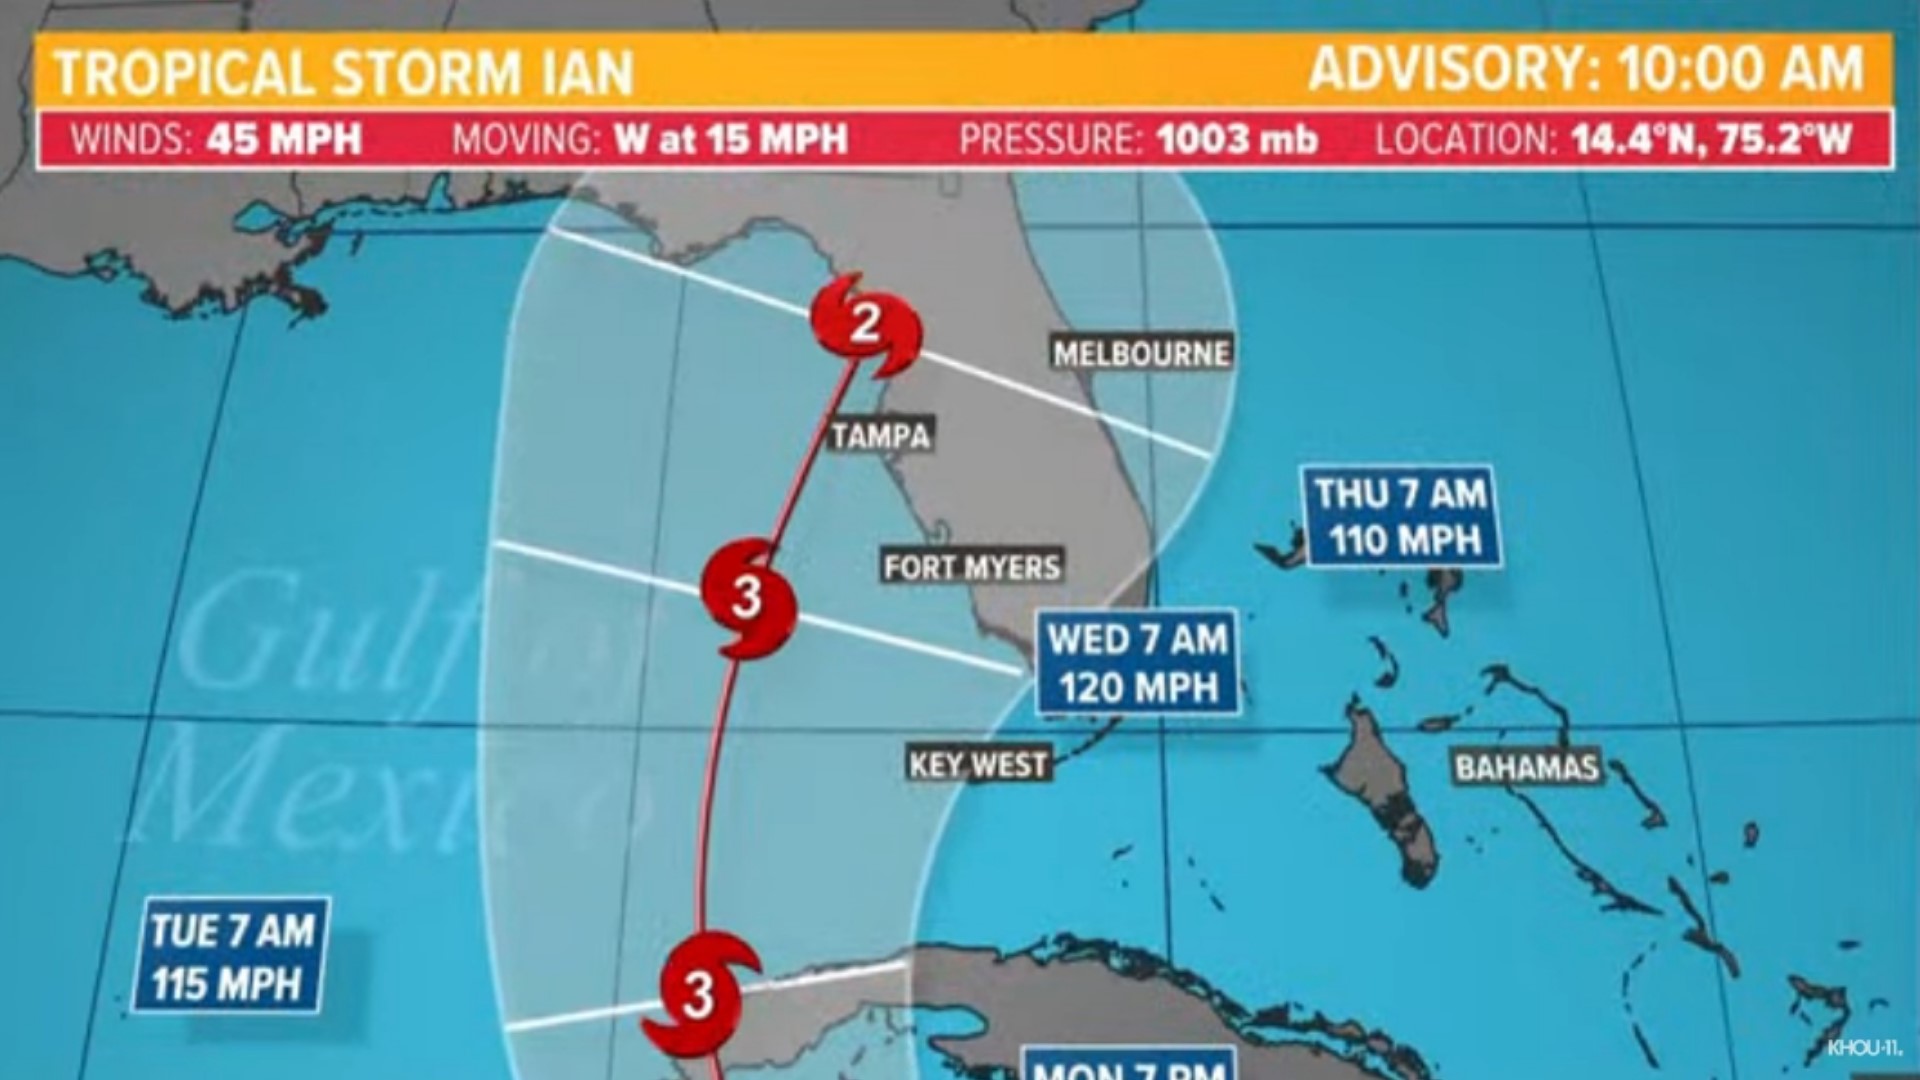 Tropical Storm Ian continues to move through the Caribbean on its way to the Gulf of Mexico. The system is expected to have an impact on Florida next week.